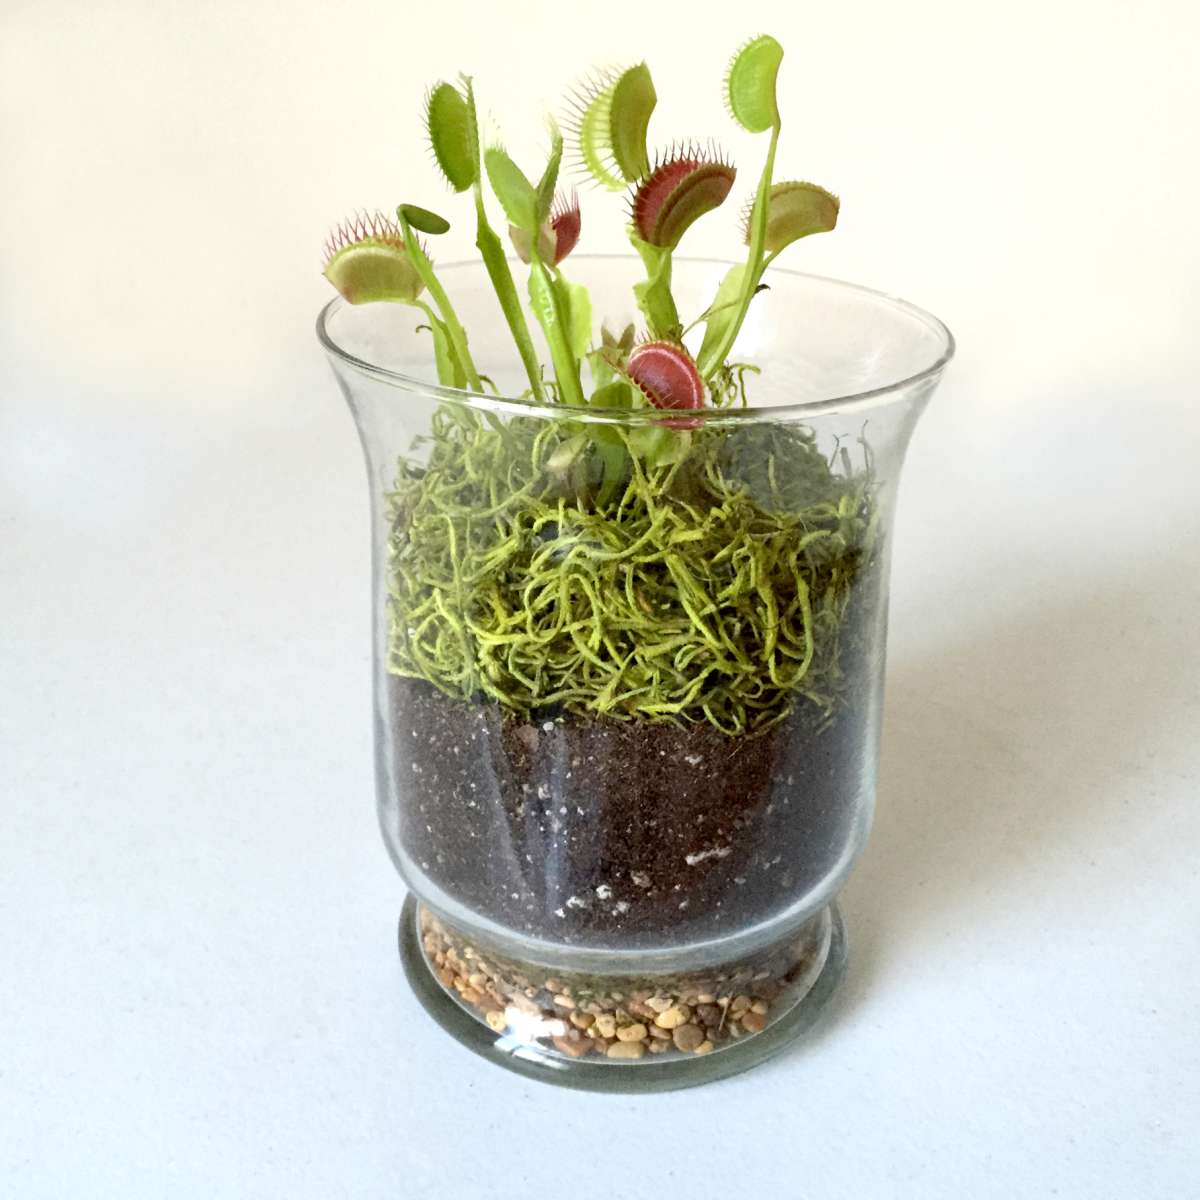 How to Care for a Venus Fly Trap